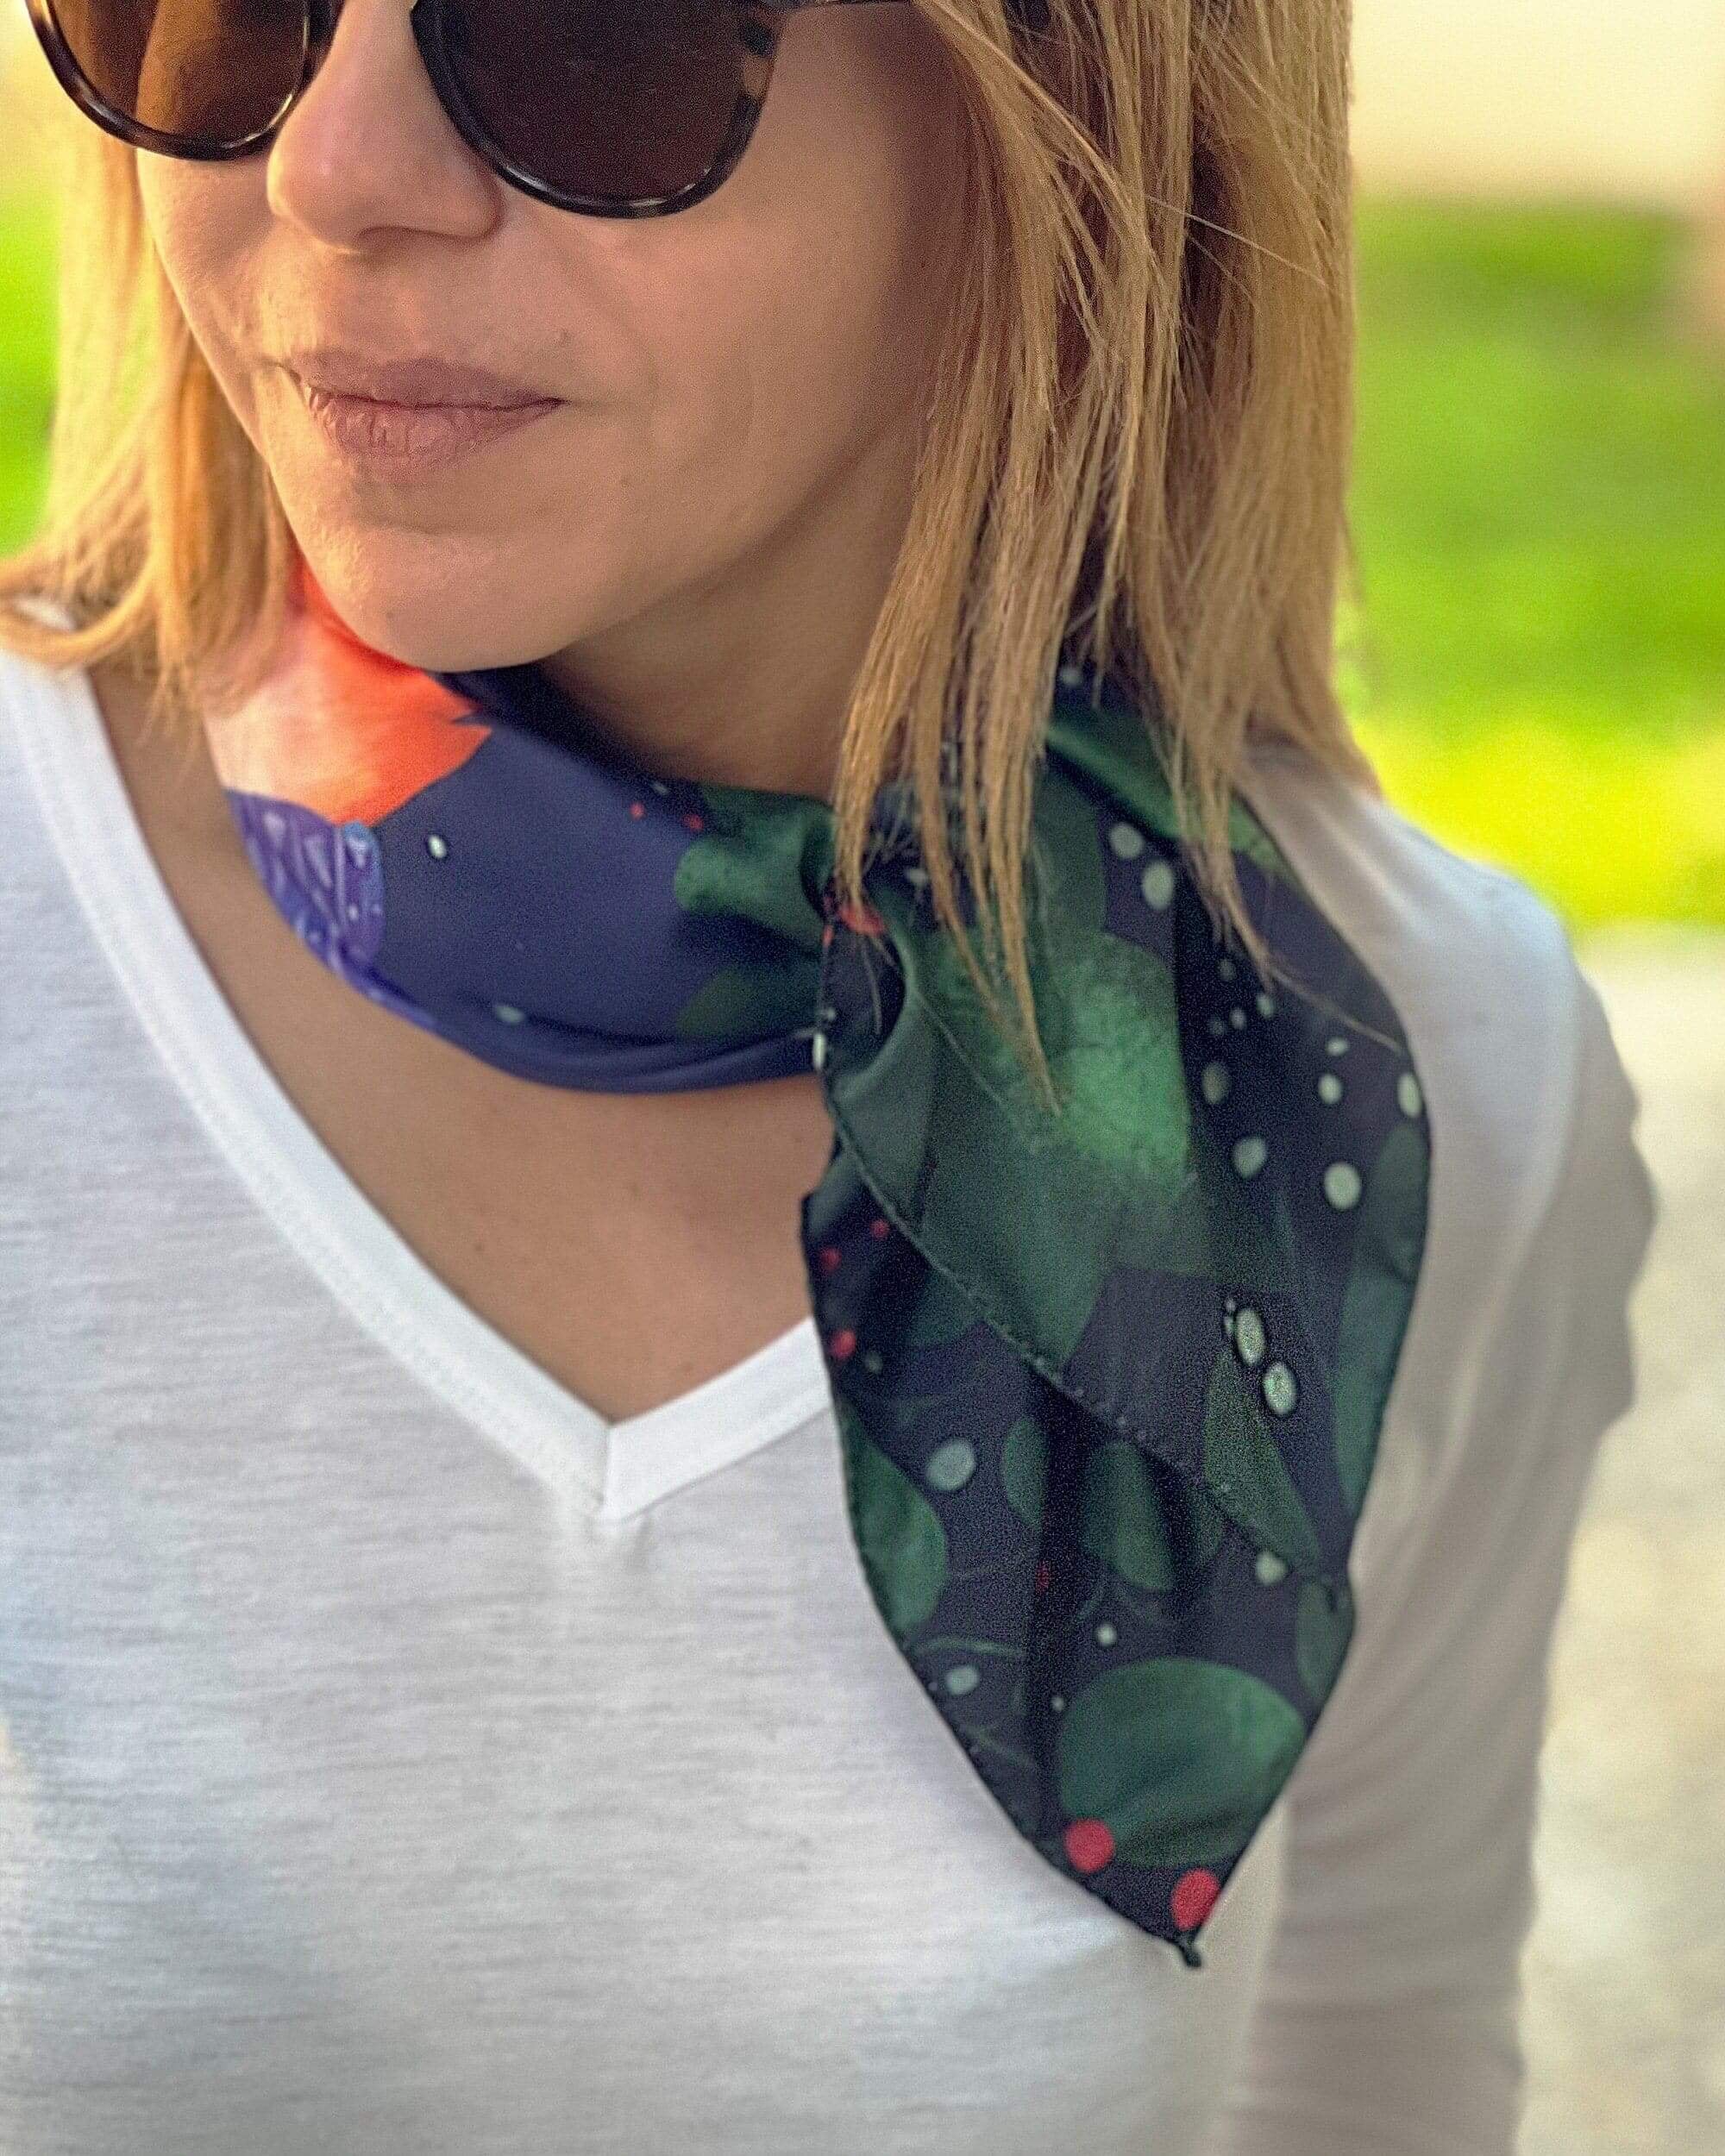 This is the perfect gift for women who love wearing stylish head scarves. The headscarf is made with quality satin fabric that will keep your hair looking sleek and stylish all day long.